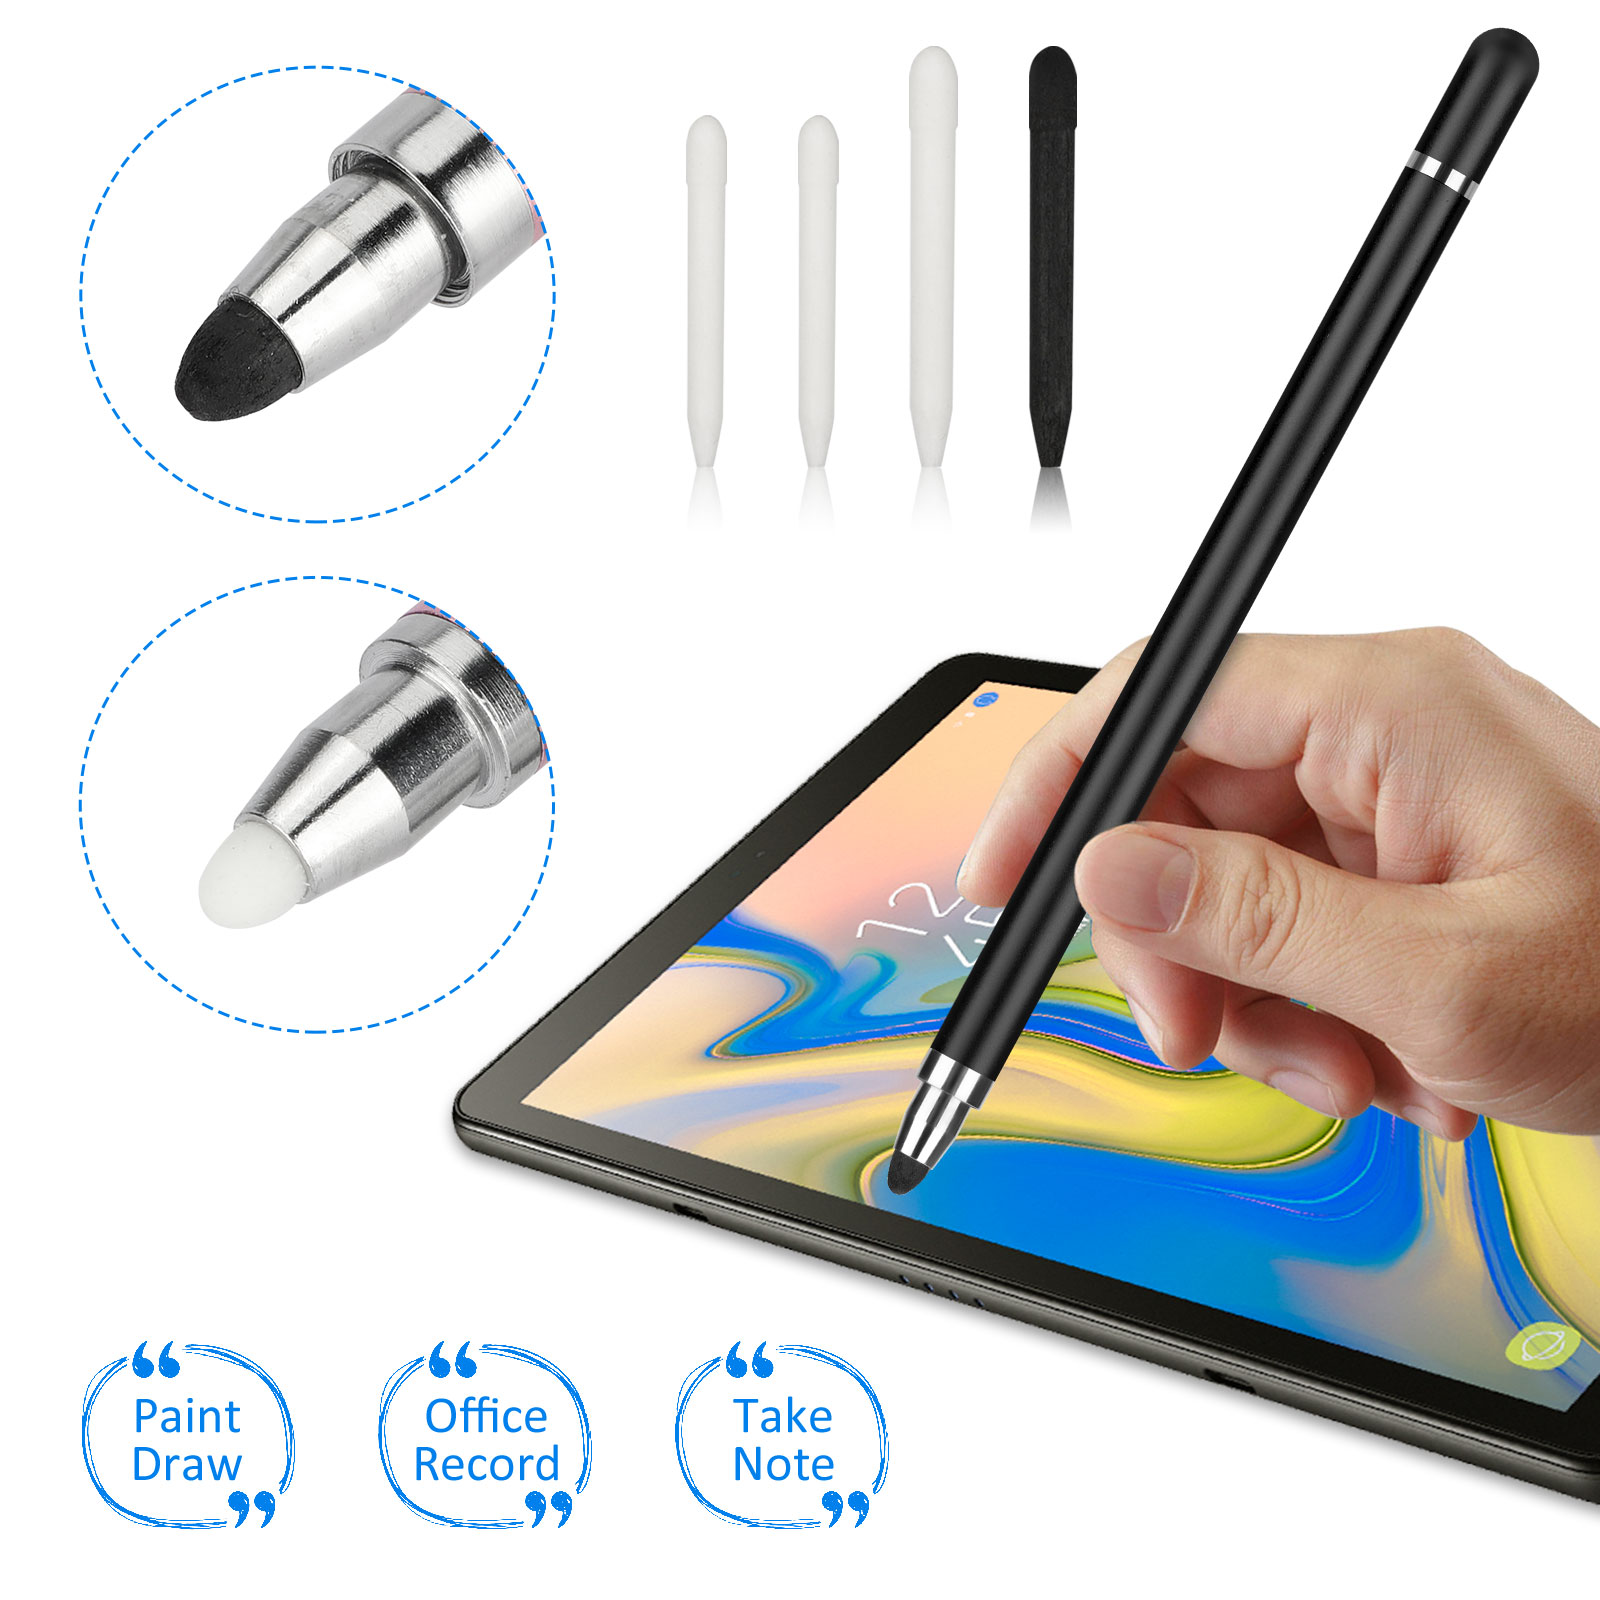 Universal Phone Tablet Touch Screen Pen Stylus for Android iPhone iPad yunbox299 3Pcs Phone Tablet Stylus Touch Screen Pen